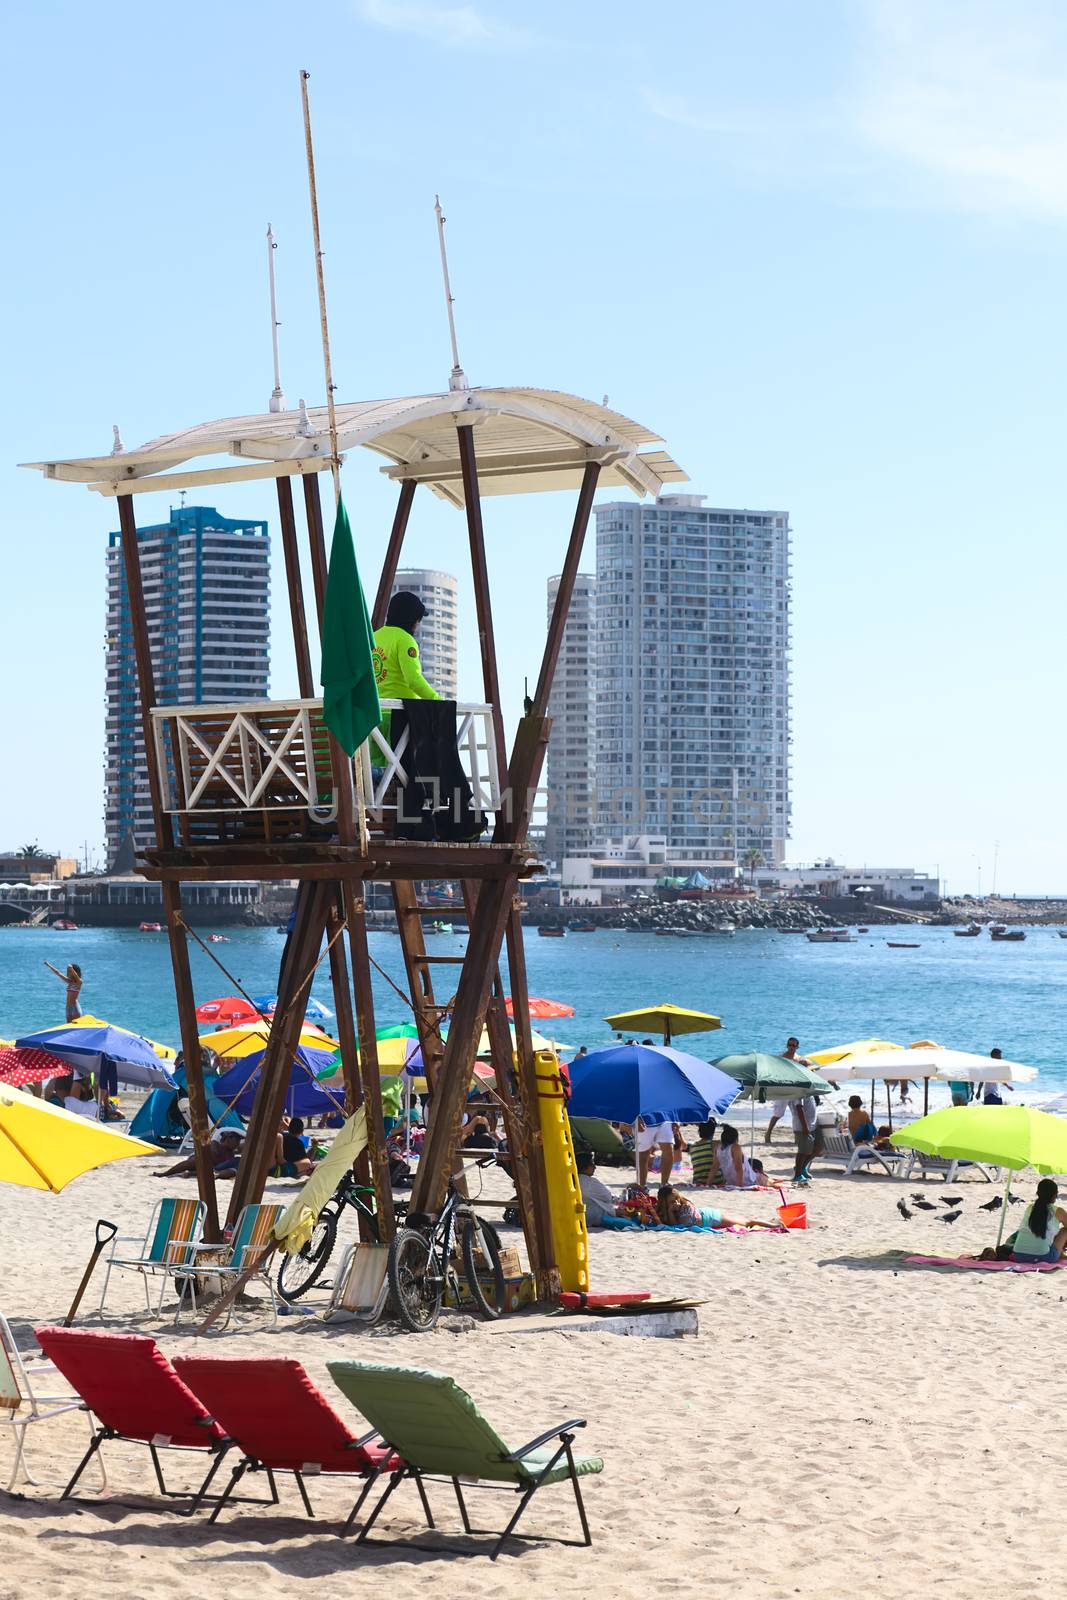 IQUIQUE, CHILE - JANUARY 23, 2015: Unidentified person in lifeguard watchtower on Cavancha beach on January 23, 2015 in Iquique, Chile. Iquique is a popular beach town and free port city in Northern Chile.